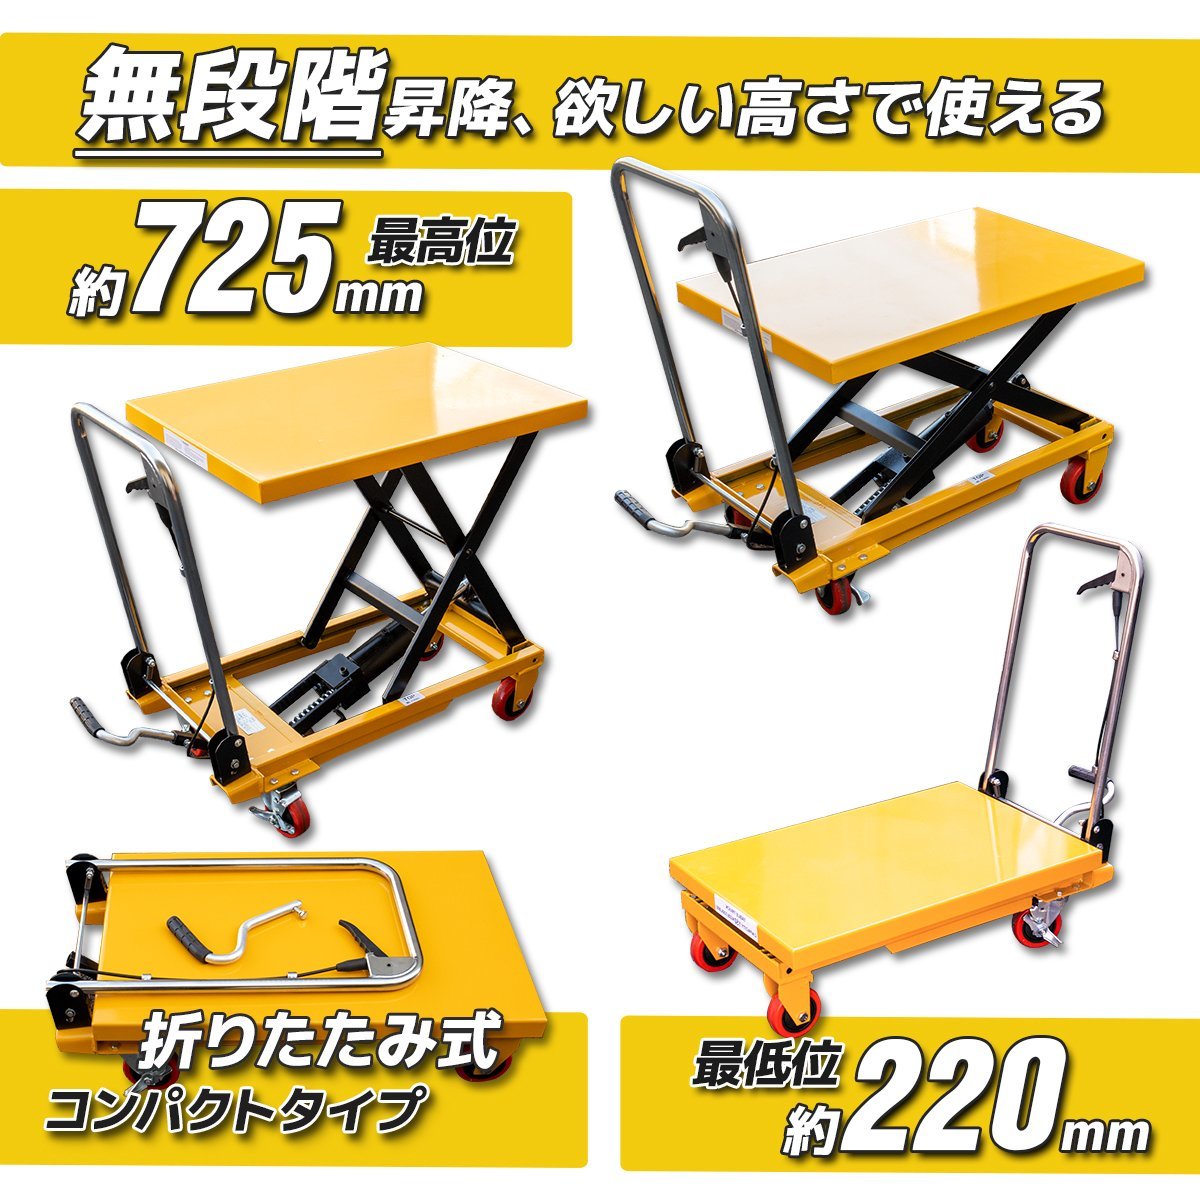 # free shipping # neat storage * folding type * hand table lift hydraulic type going up and down push car stepping lifter withstand load 150KG